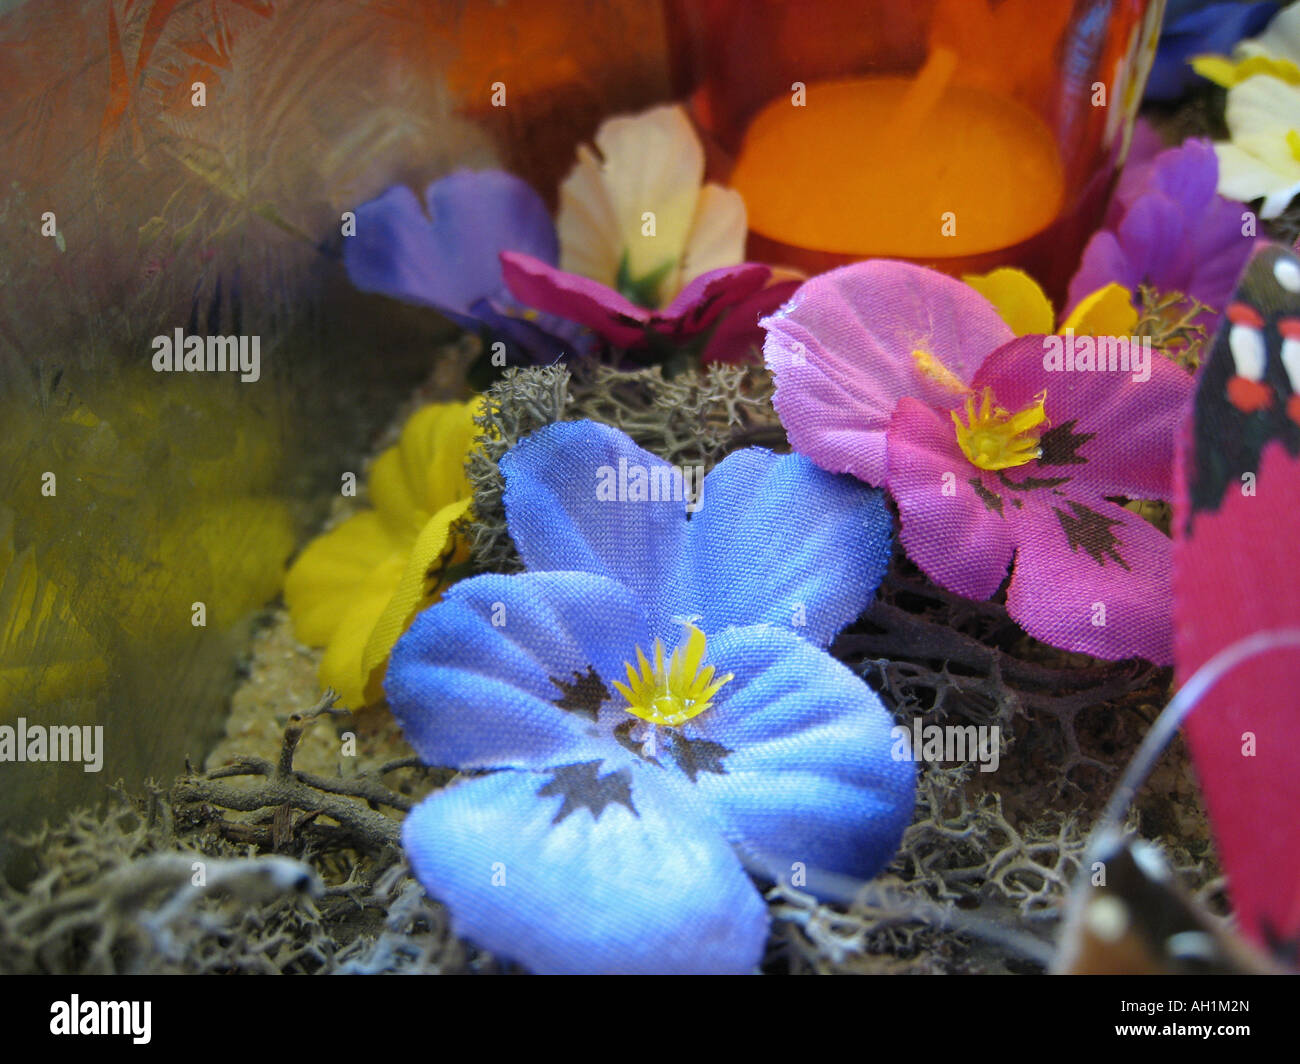 flower arrangement with blue and purple artificial flowers Stock Photo